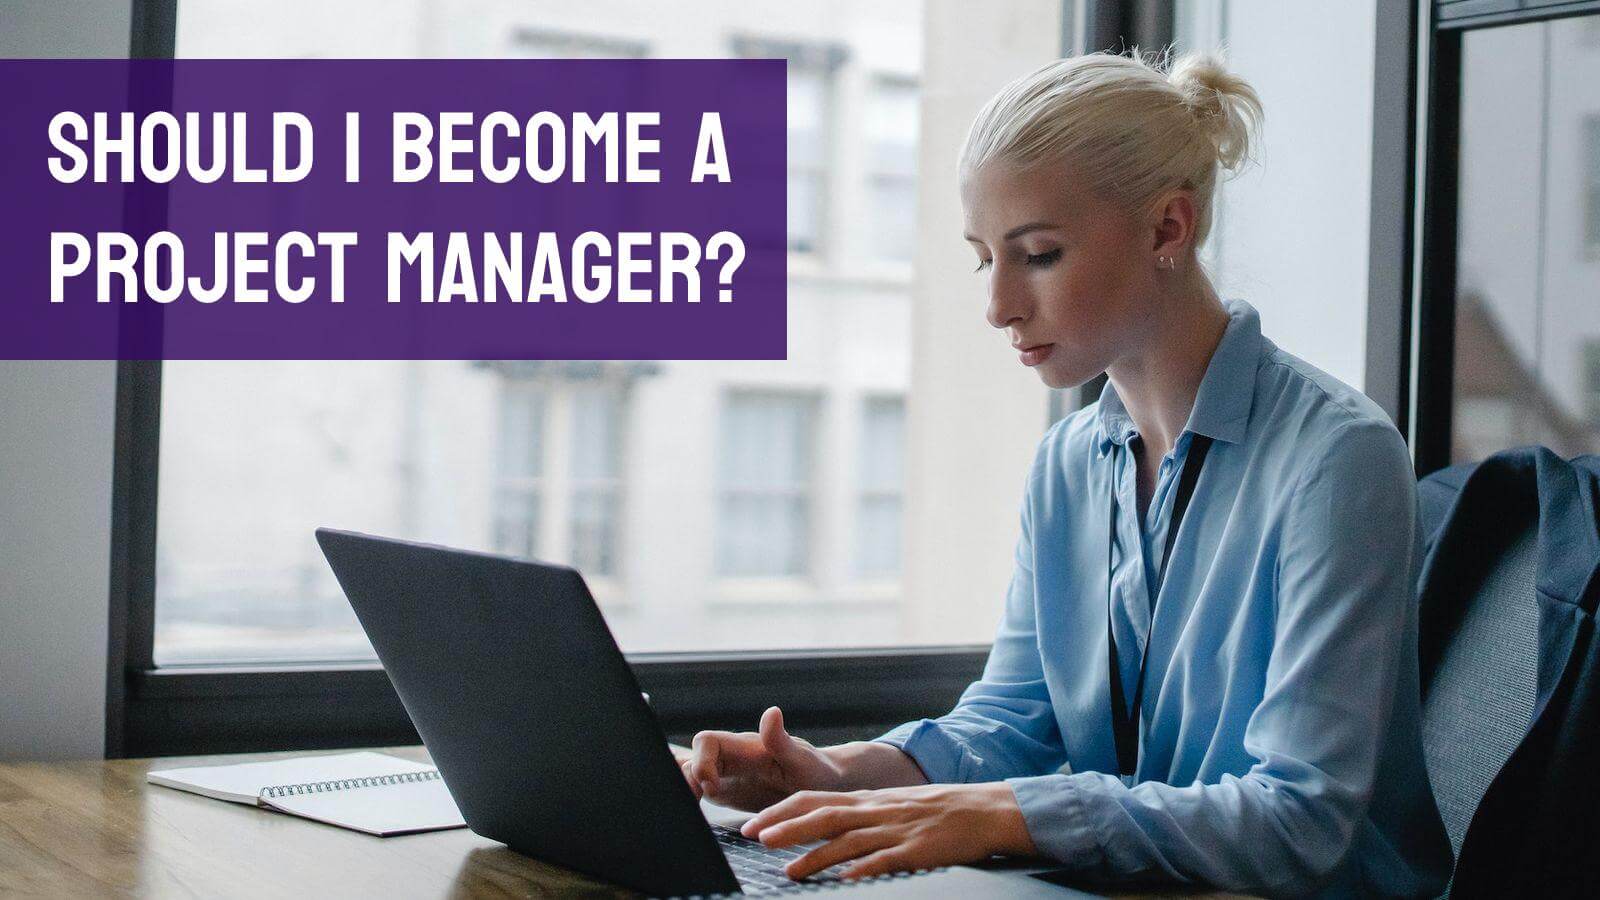 Is the Project Manager role a good fit for you? Take the self-assessment quiz